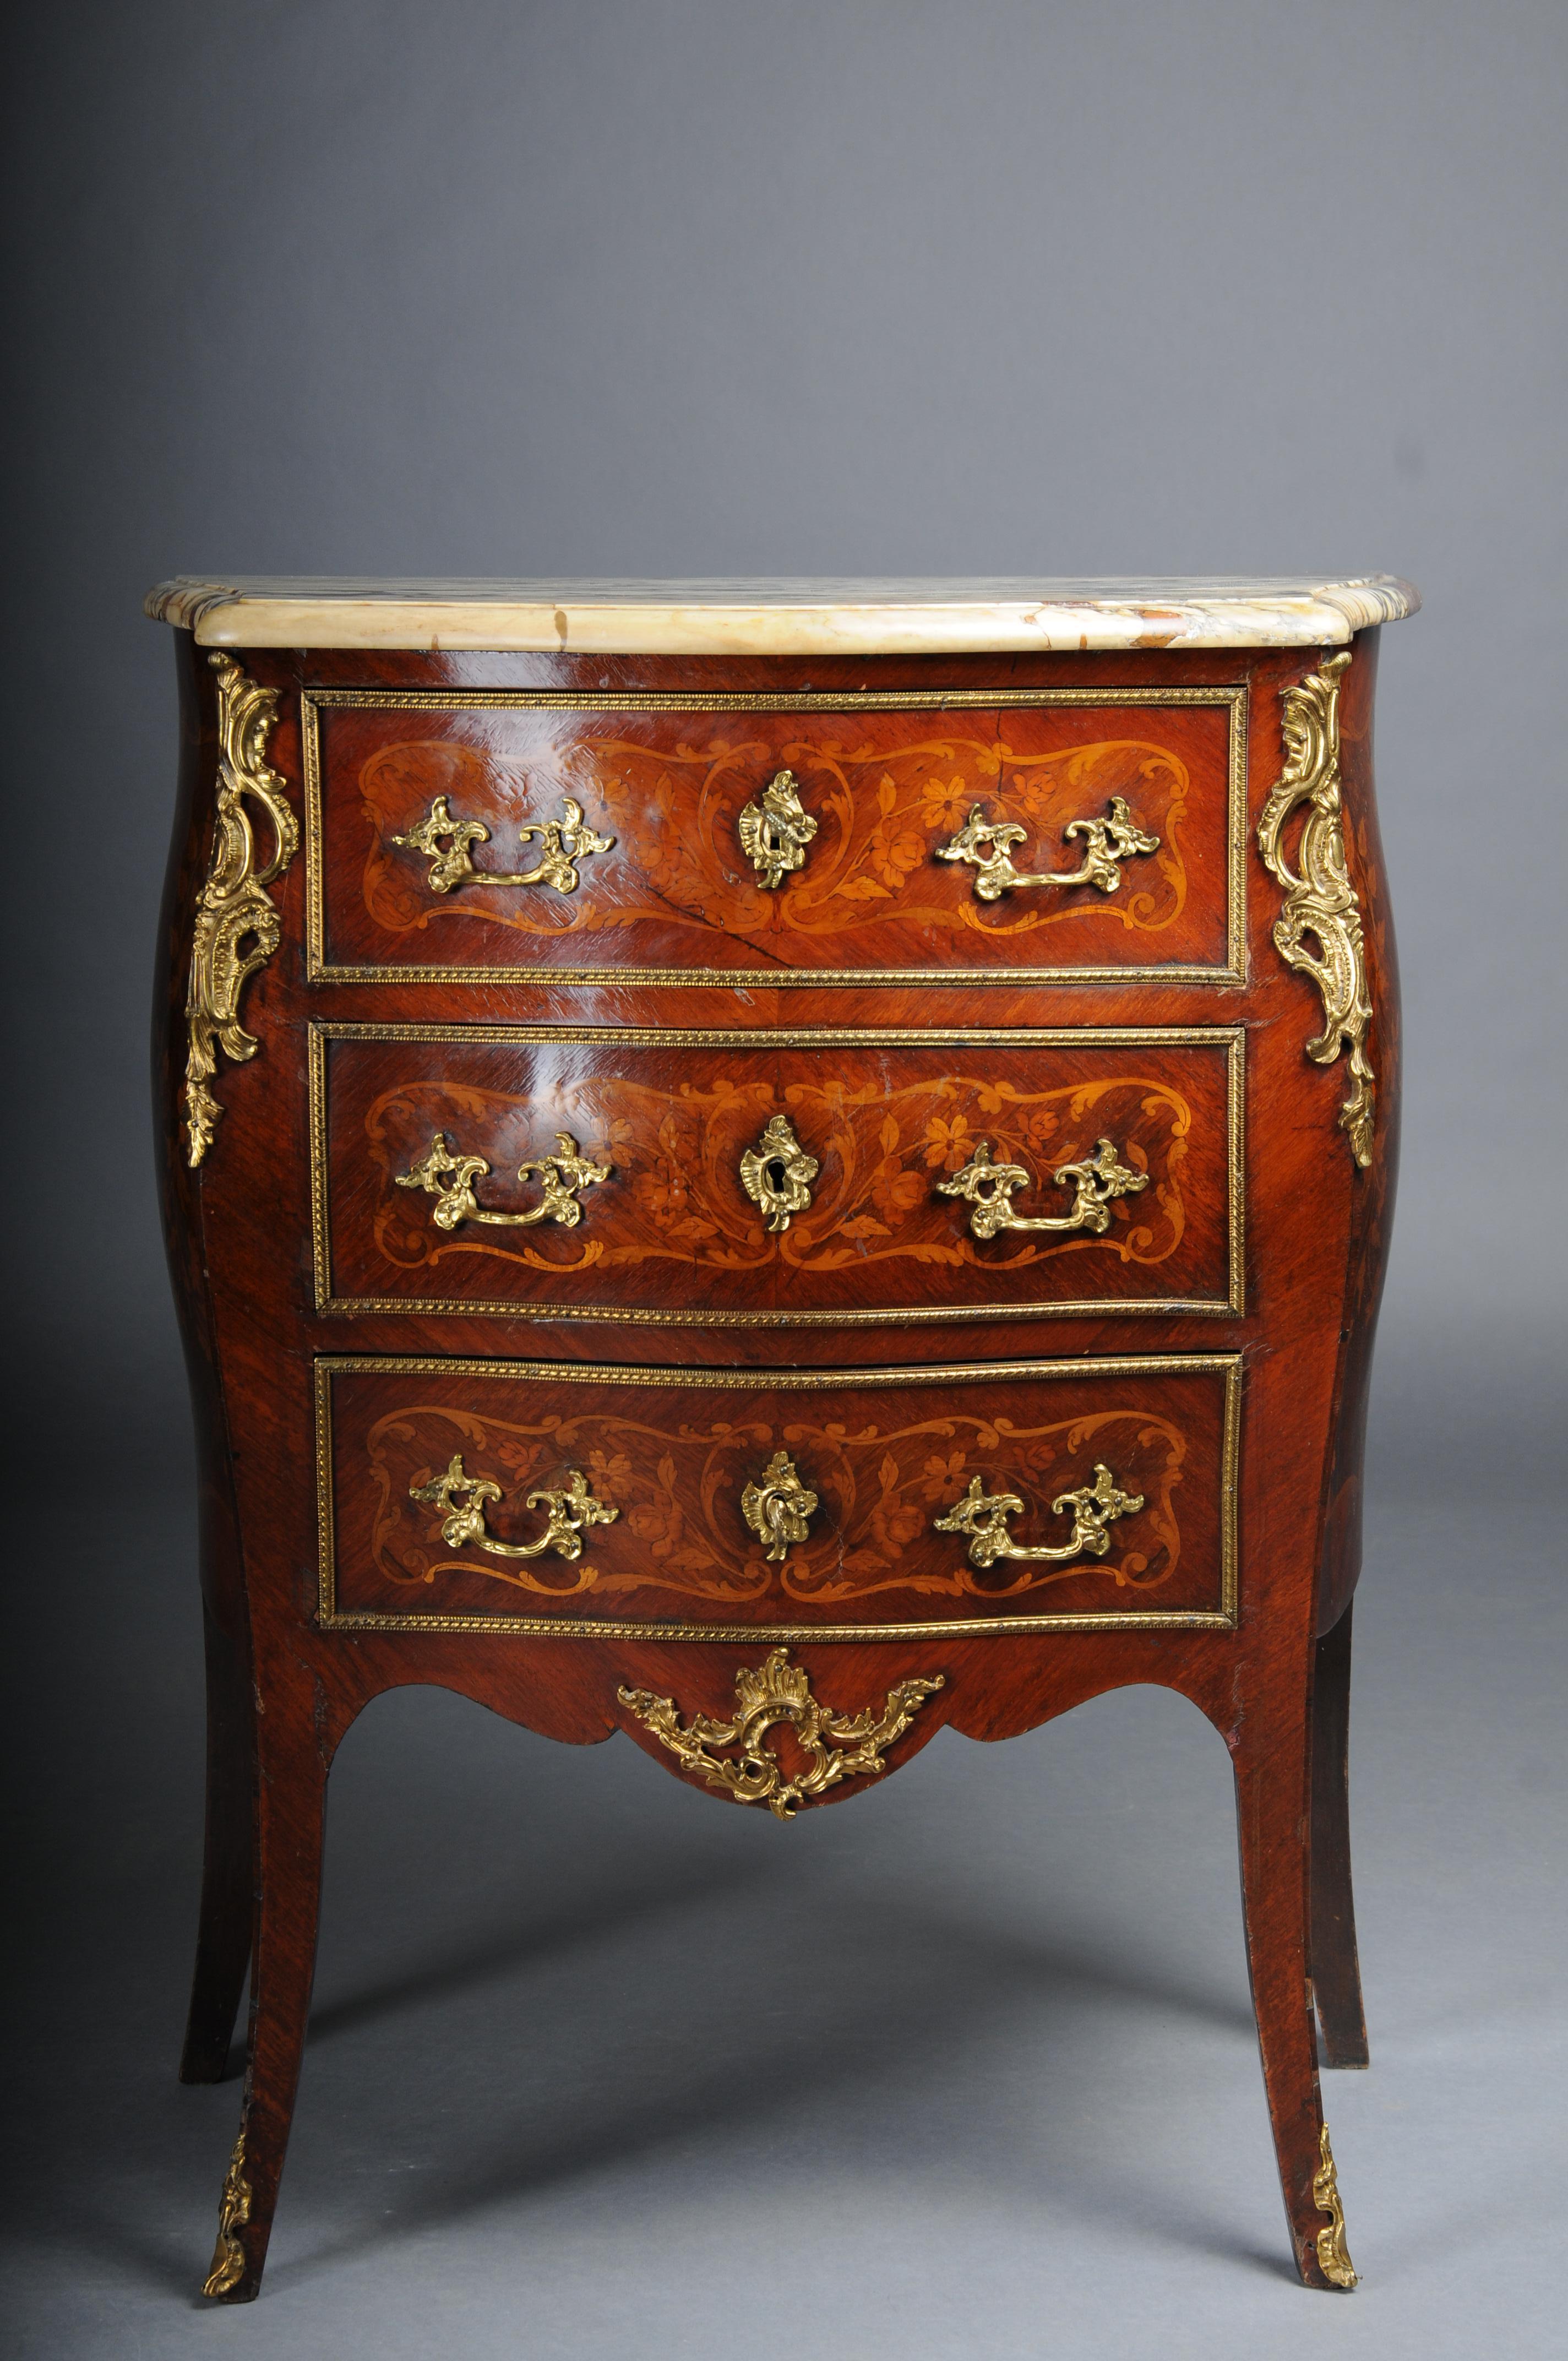 19th Century chest of drawers Louis XV, Paris

Very well finished inlaid chest of drawers
Curved shape made of solid HLZ oak. 3Lockable drawer fronts with ornate bronze handles.

Profiled thick cover plate made of white marble with dark